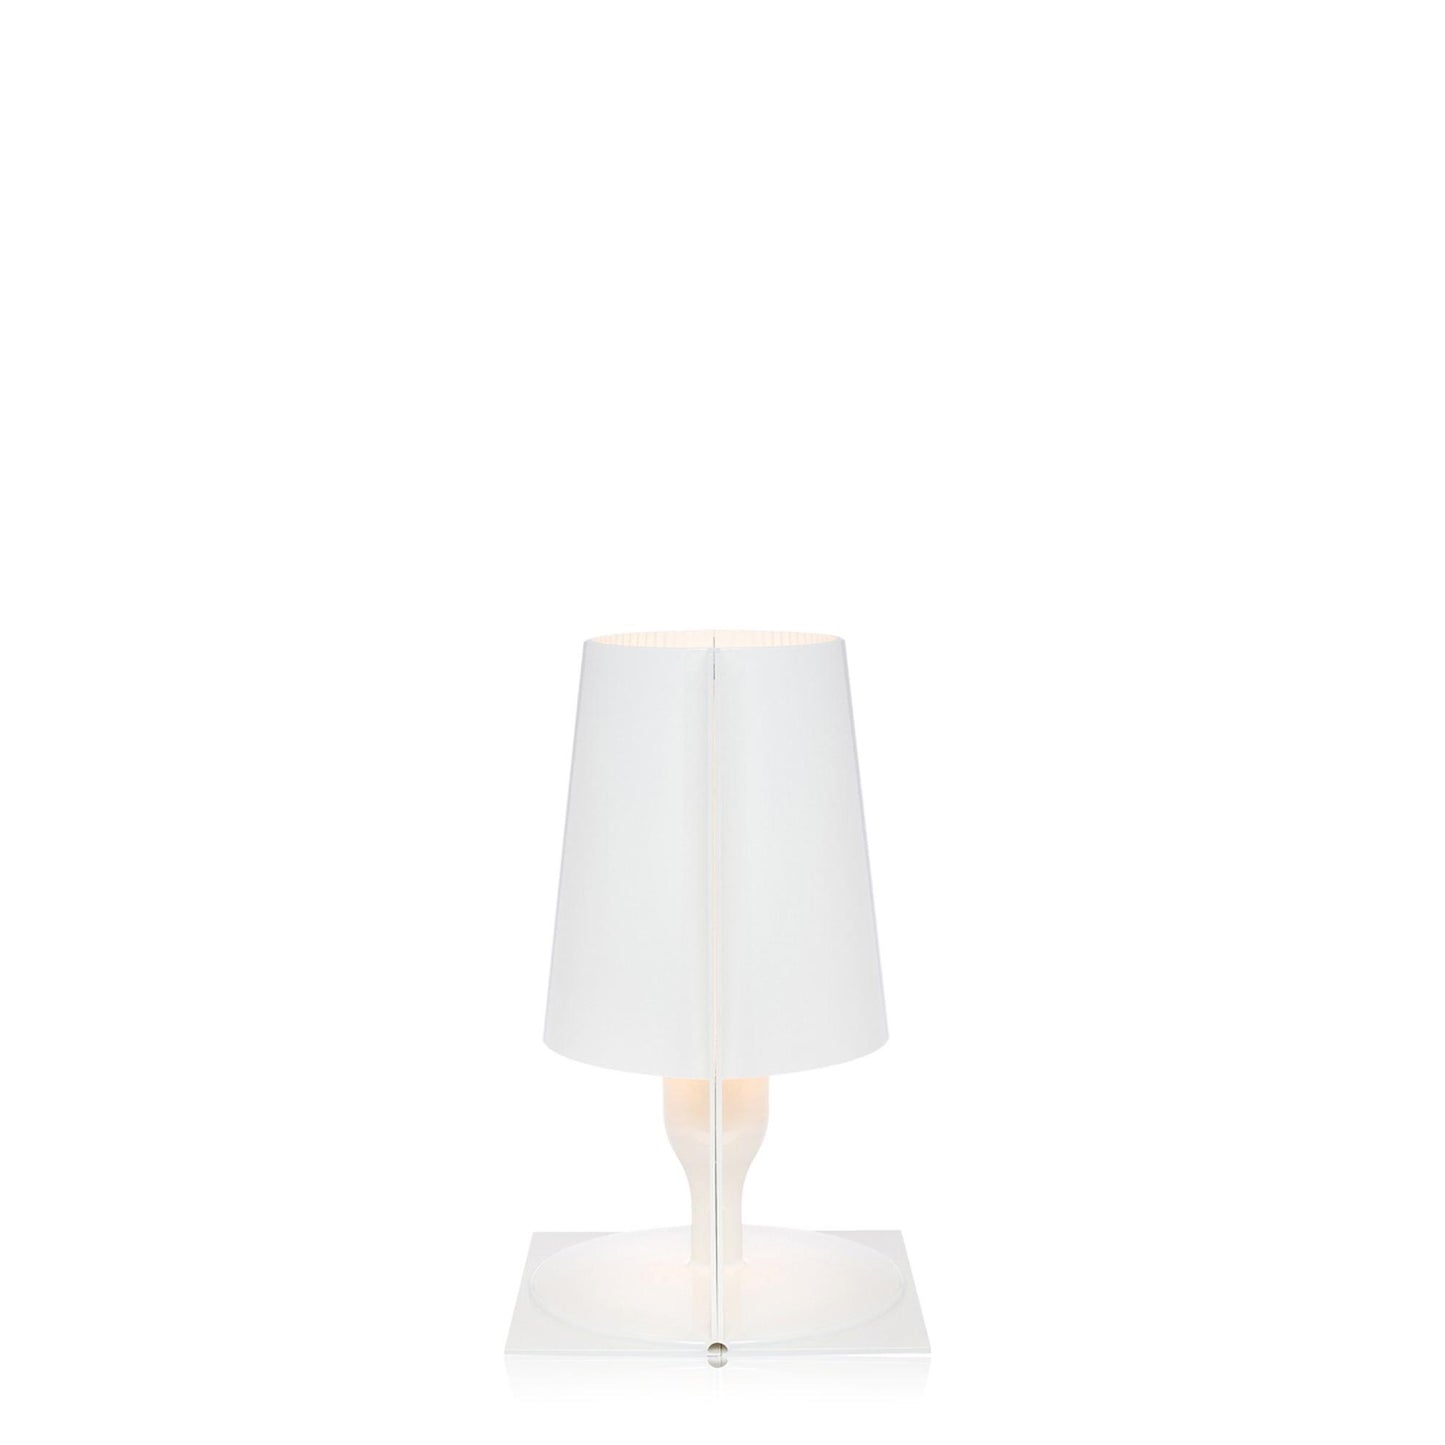 Take Table Lamp by Kartell #White